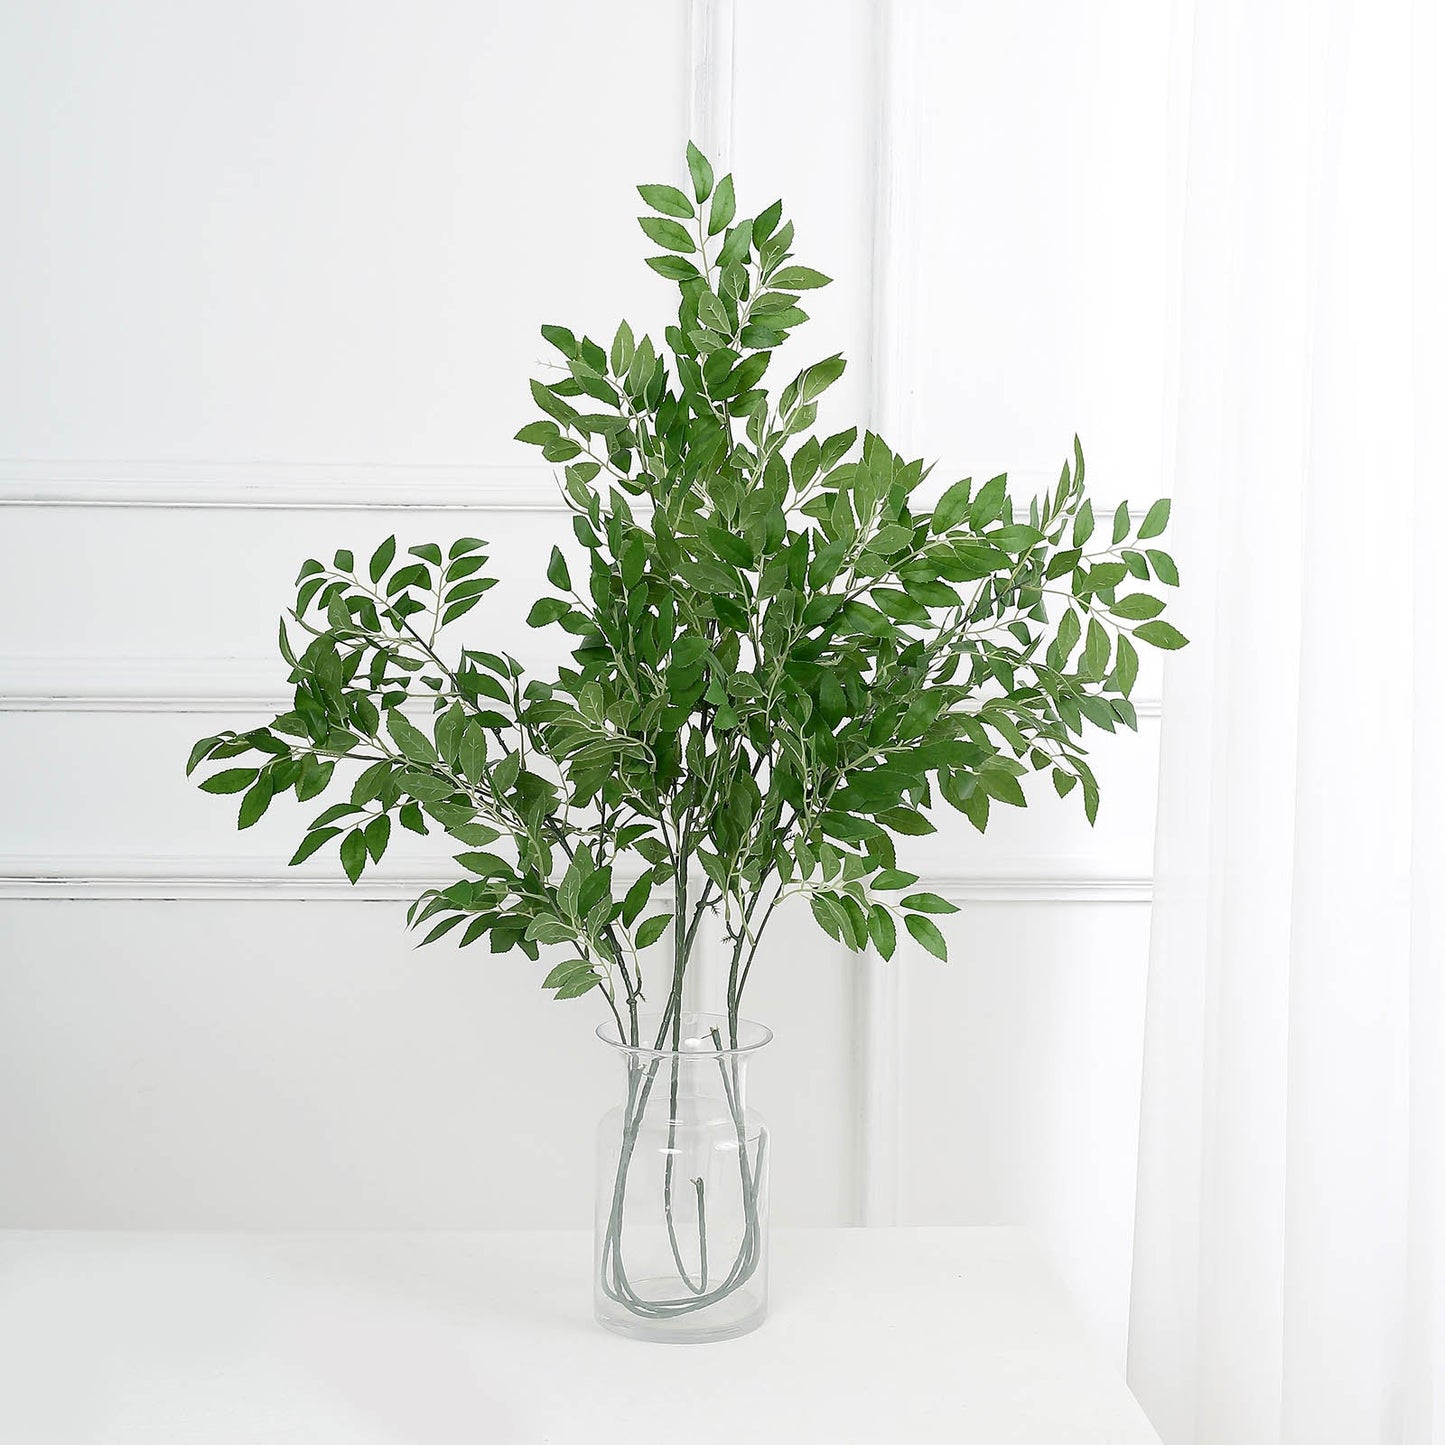 2 Bushes Light Green Artificial Silk Plant Stem Vase Fillers, Faux Beech Leaf Branches 42" Tall